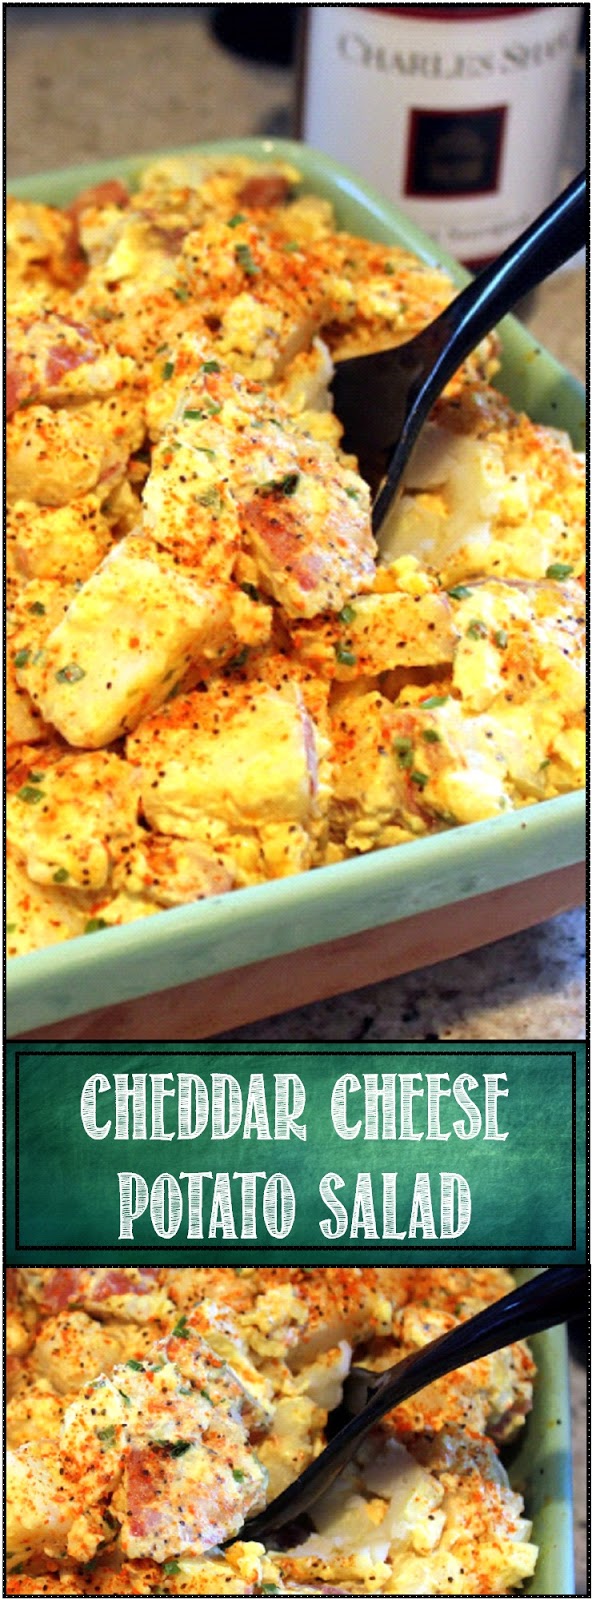 52 Ways to Cook: Cheddar Cheese Potato Salad - Grilling Time Side Dish